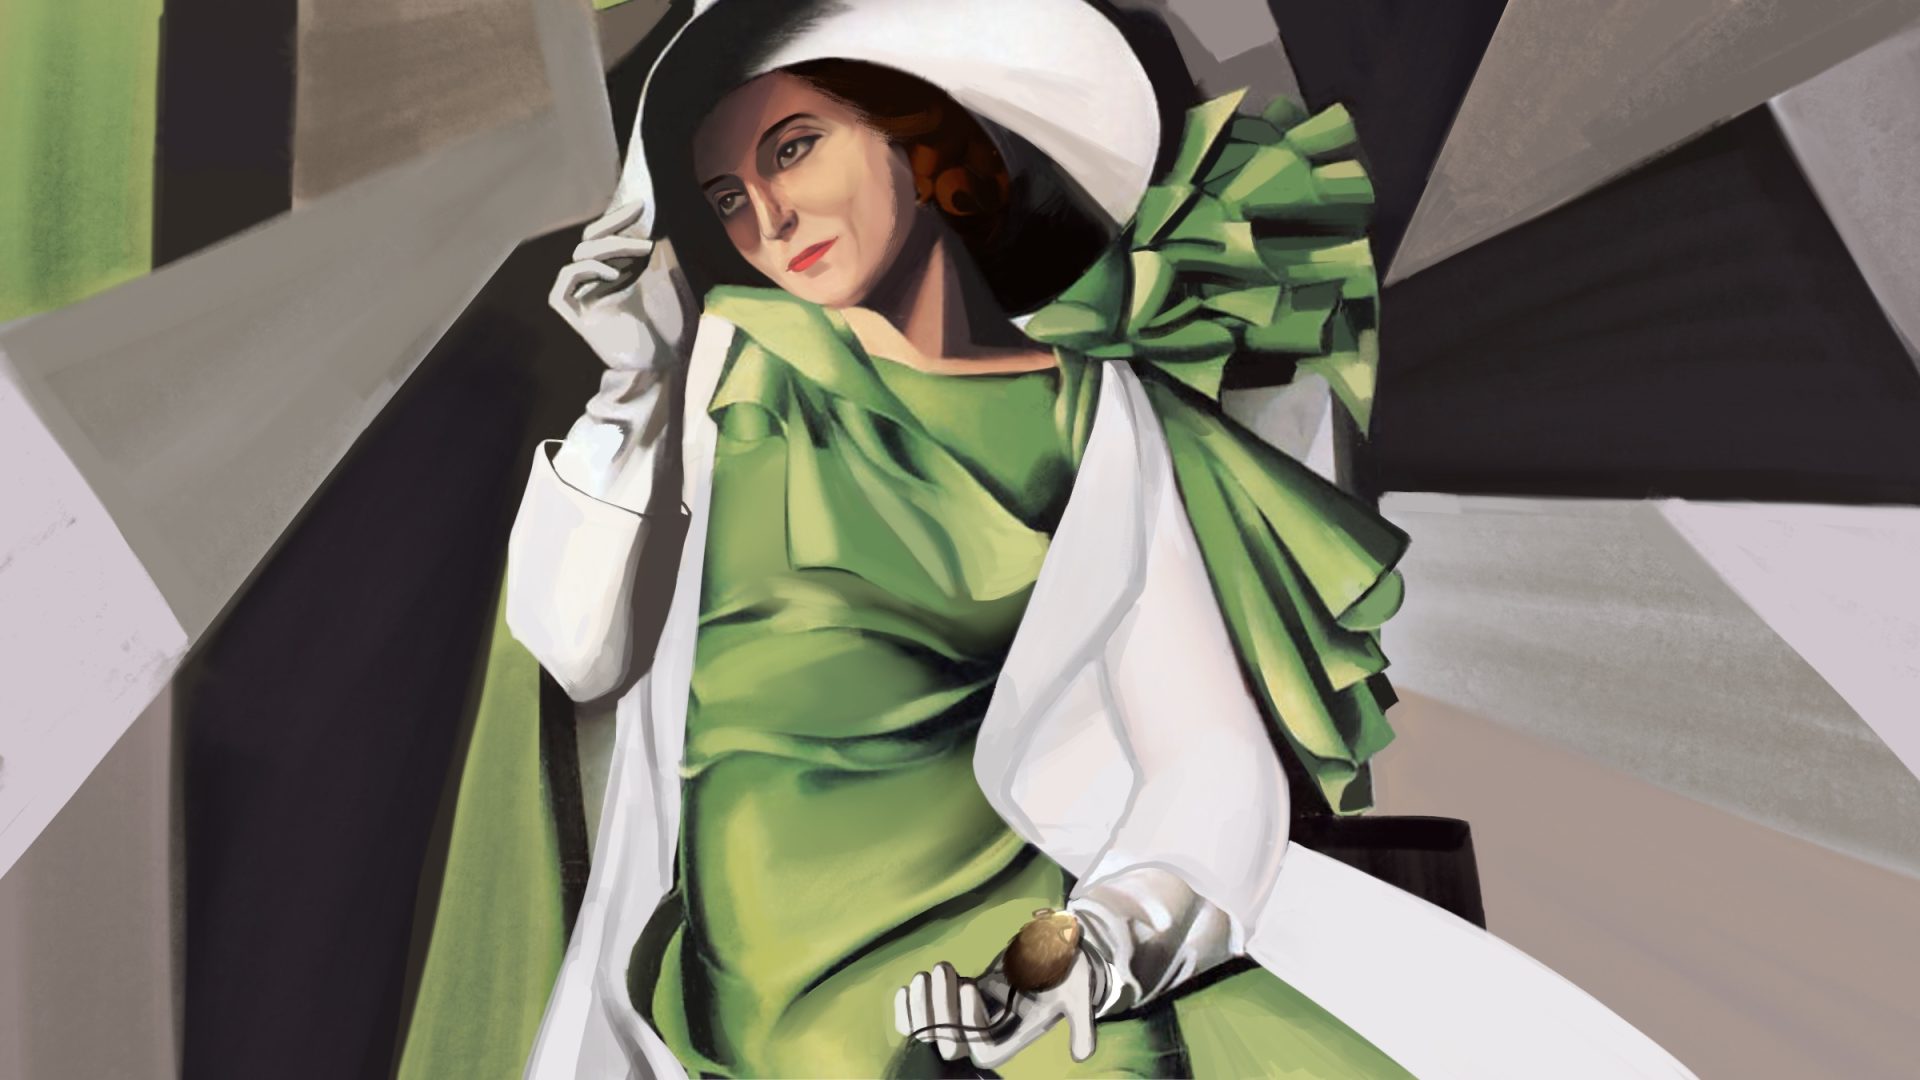 Portrait of Rita Levi-Montalcini in the style of Temara de Lempicka’s “Young Lady with Gloves.”